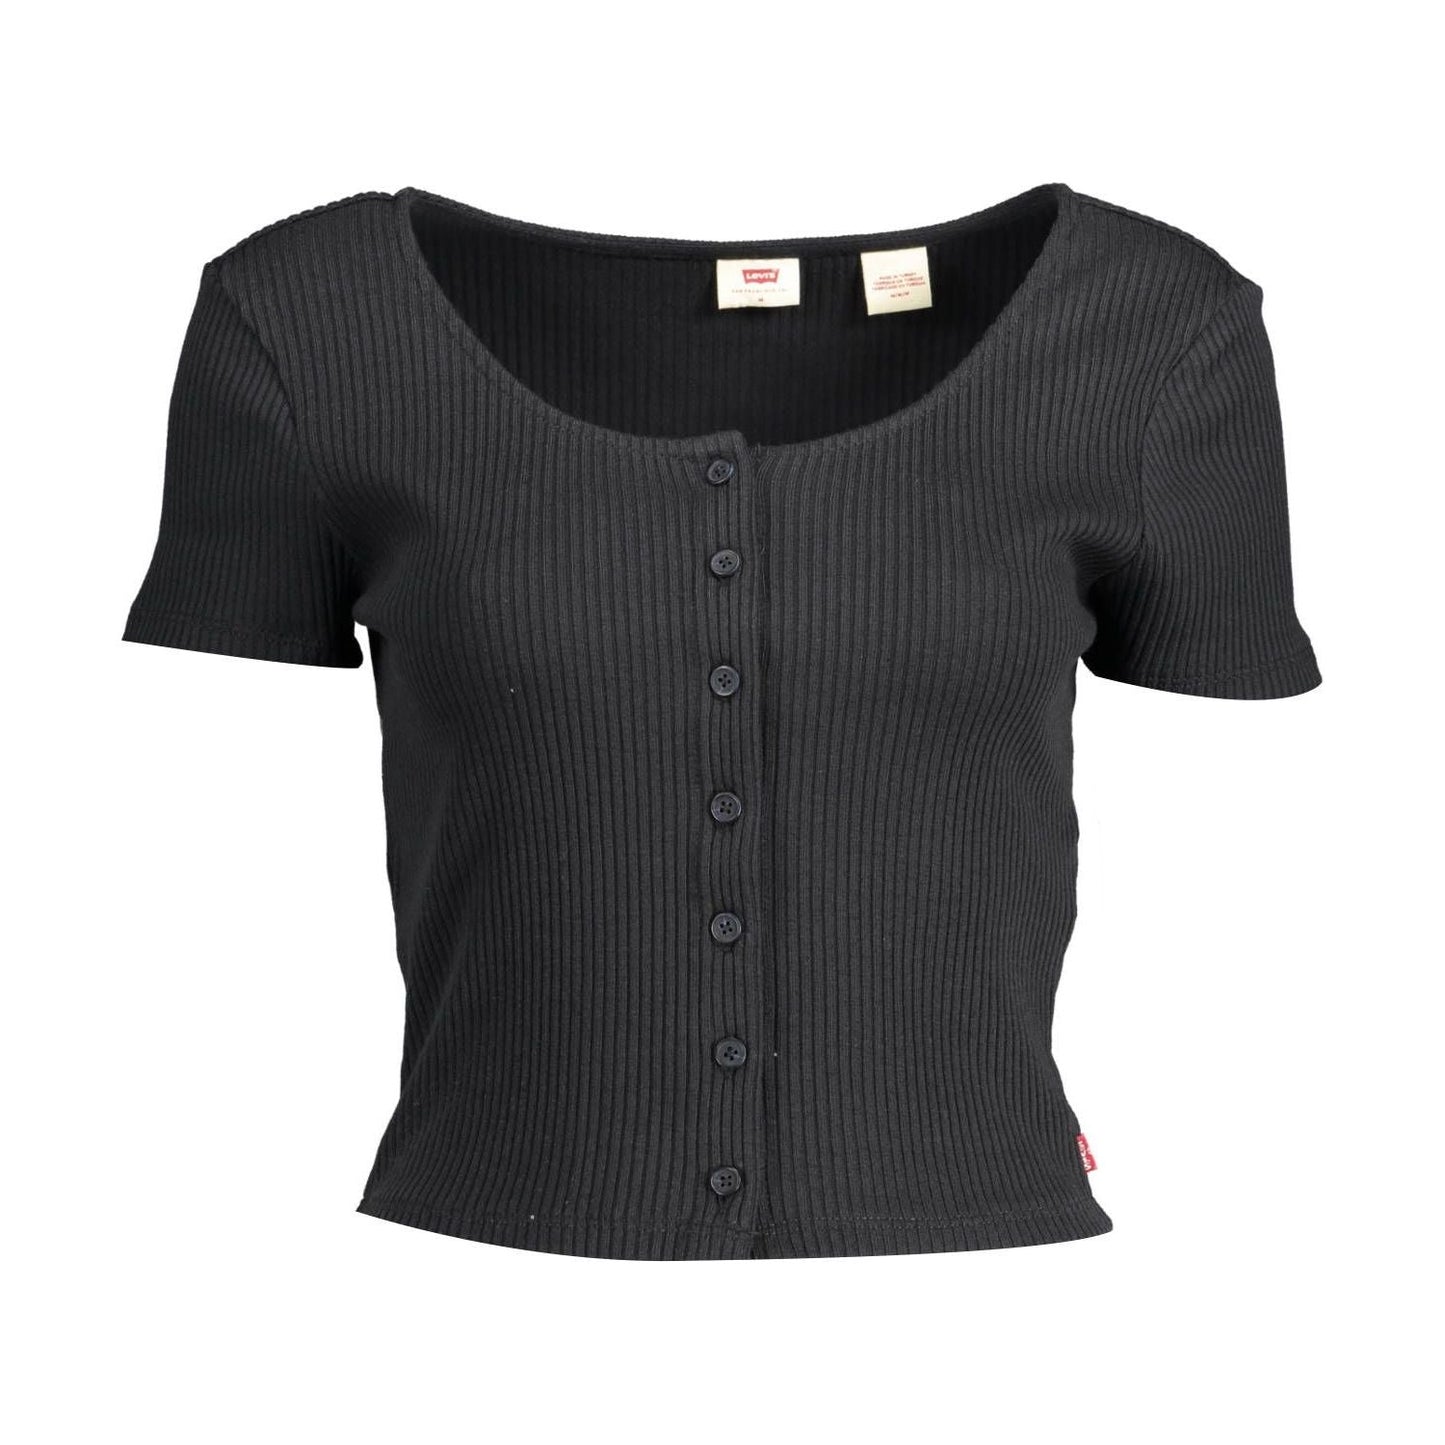 Levi's Chic Black Cotton Tee with Button Detail chic-black-cotton-tee-with-button-detail